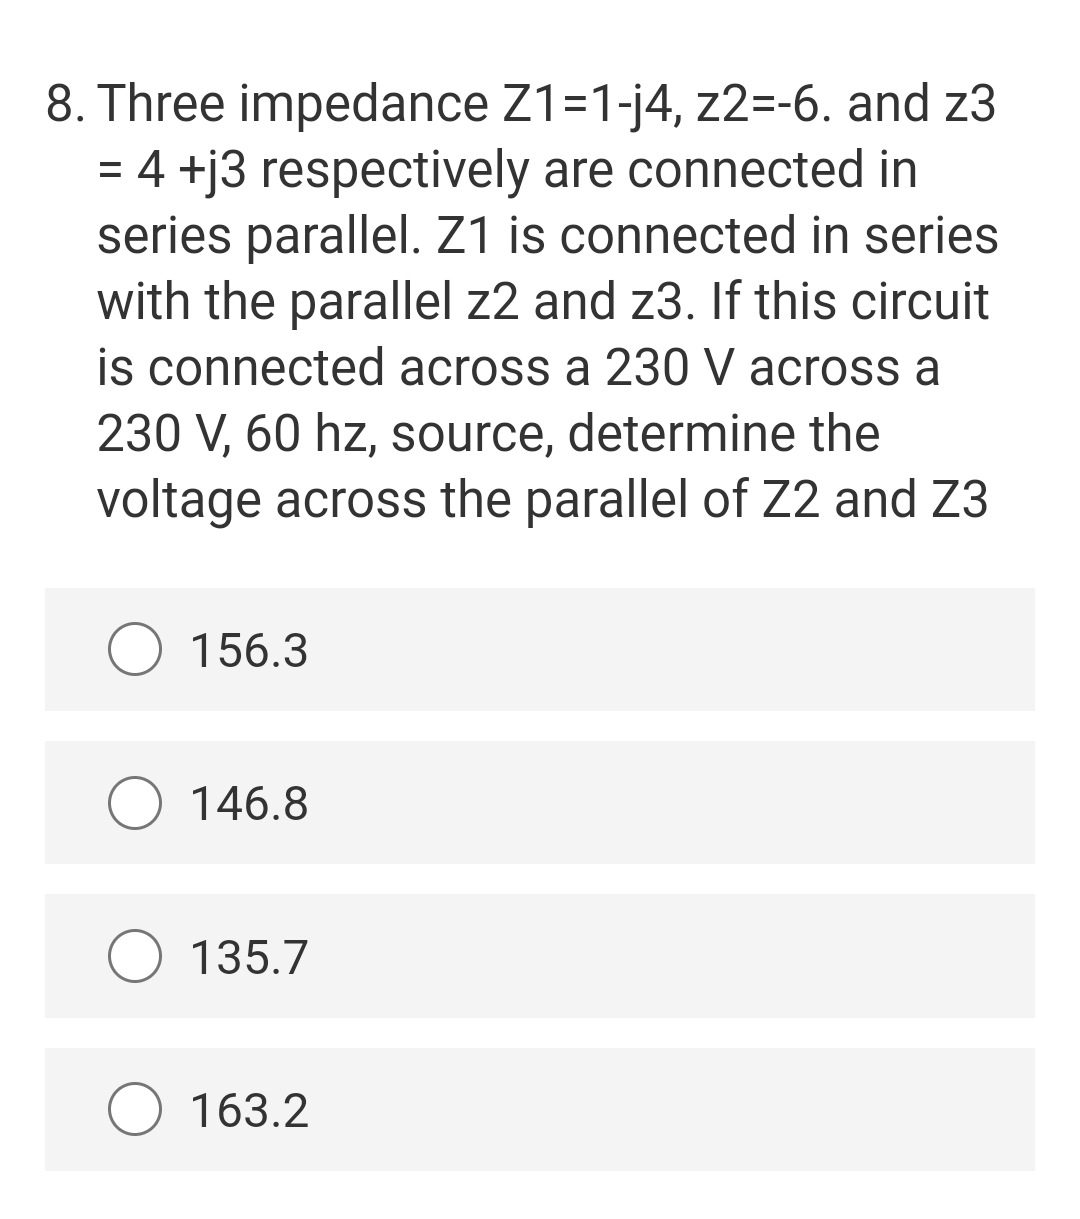 8. Three impedance Z1=1-j4, z2=-6. and z3
= 4 +j3 respectively are connected in
series parallel. Z1 is connected in series
with the parallel z2 and z3. If this circuit
is connected across a 230 V across a
230 V, 60 hz, source, determine the
voltage across the parallel of Z2 and Z3
O 156.3
146.8
135.7
O 163.2
